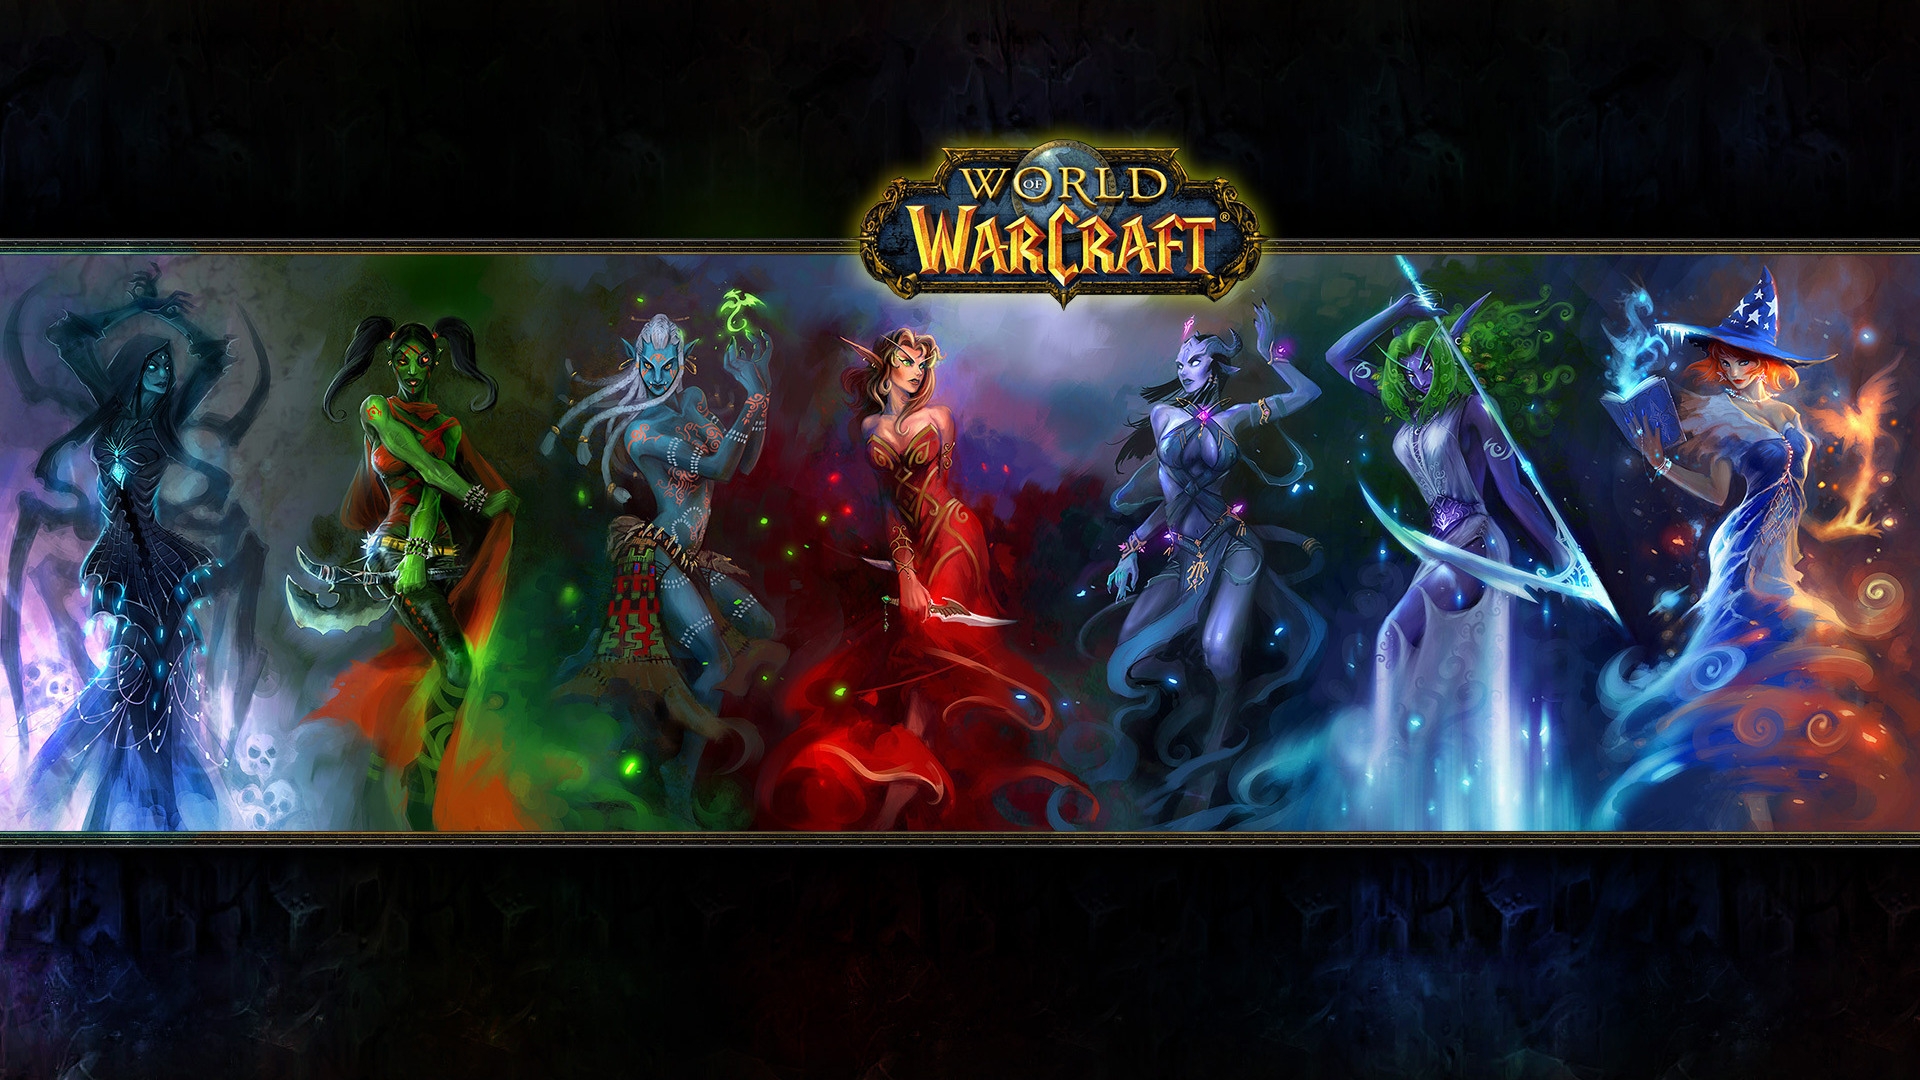 World of Warcraft for 1920 x 1080 HDTV 1080p resolution